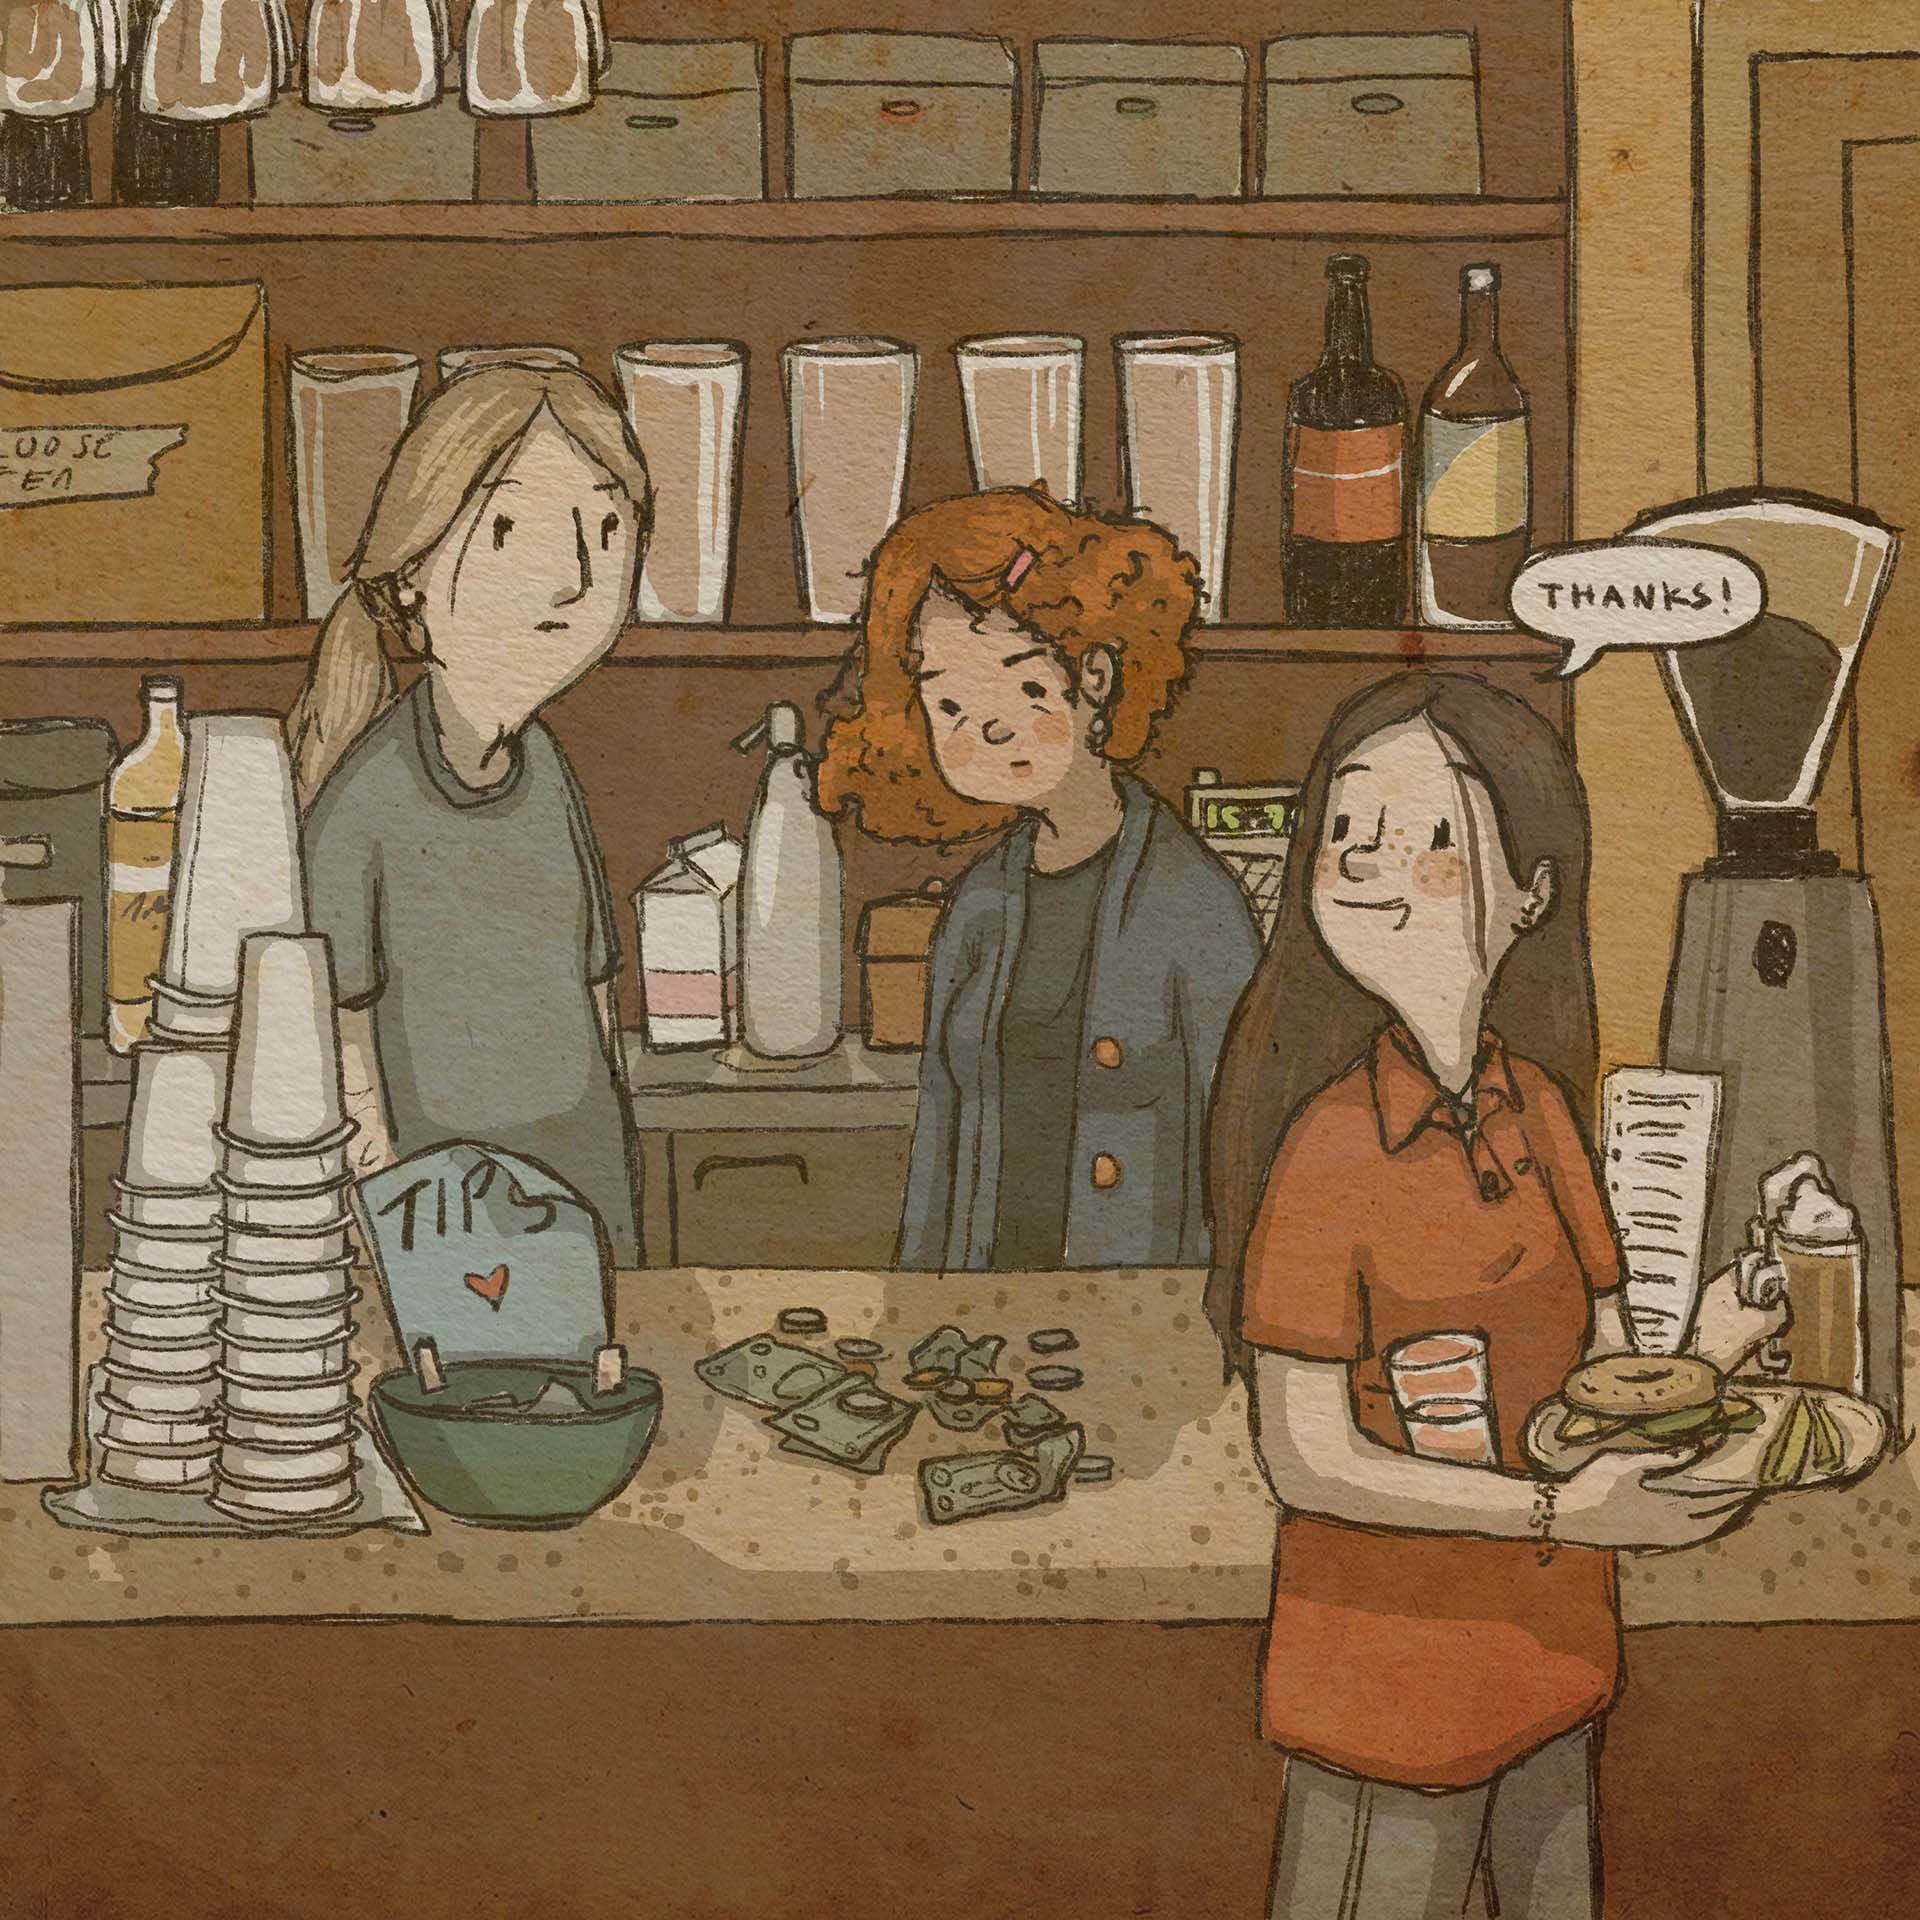 Ponytail guy and a curly red-haired employee look on from behind the counter as Briana walks away with her sandwich and hot chocolate. "Thanks!" she says. On the counter are a few scattered coins and crumpled bills. 